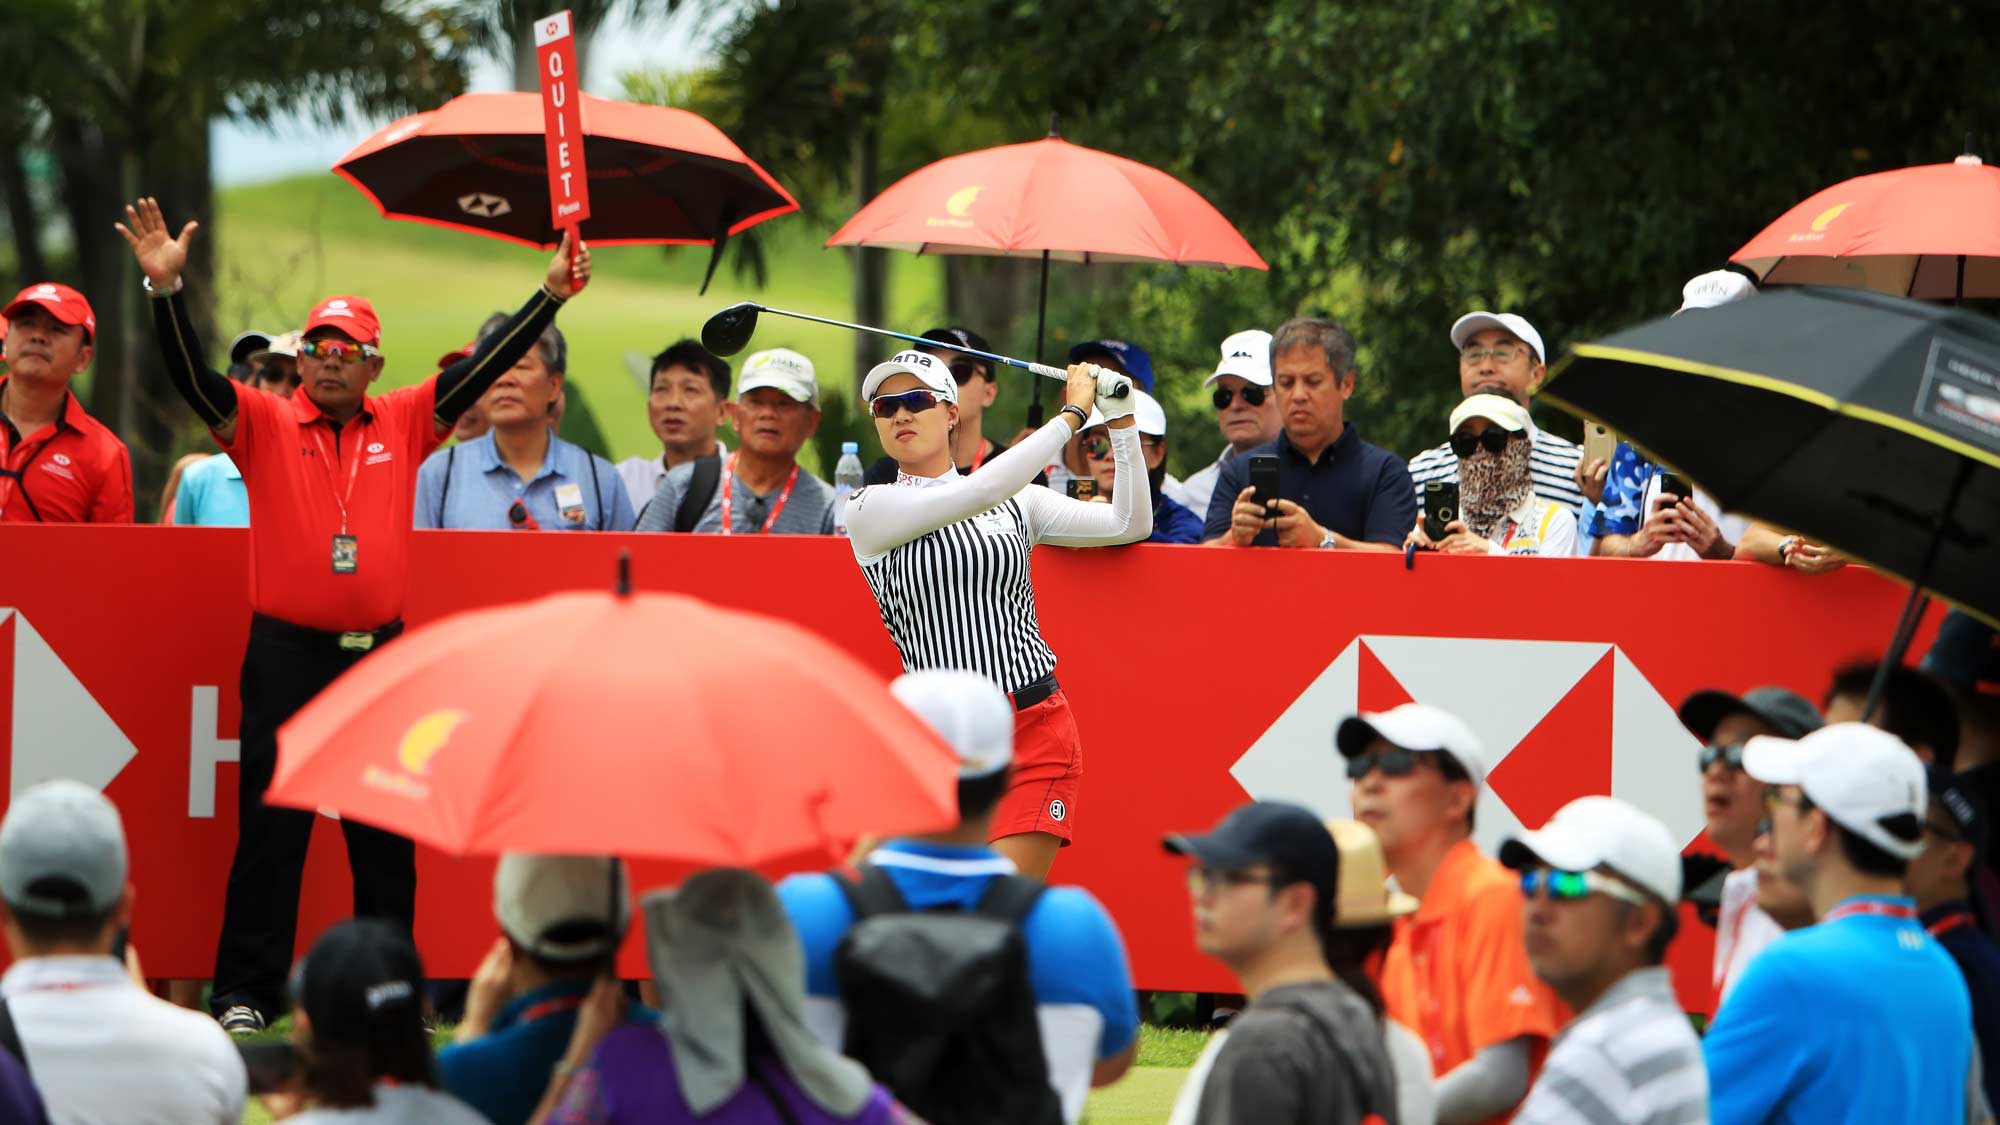 Minjee Lee of Australia plays her shot from the tenth tee during the third round of the HSBC Women's World Championship at Sentosa Golf Club on March 02, 2019 in Singapore.